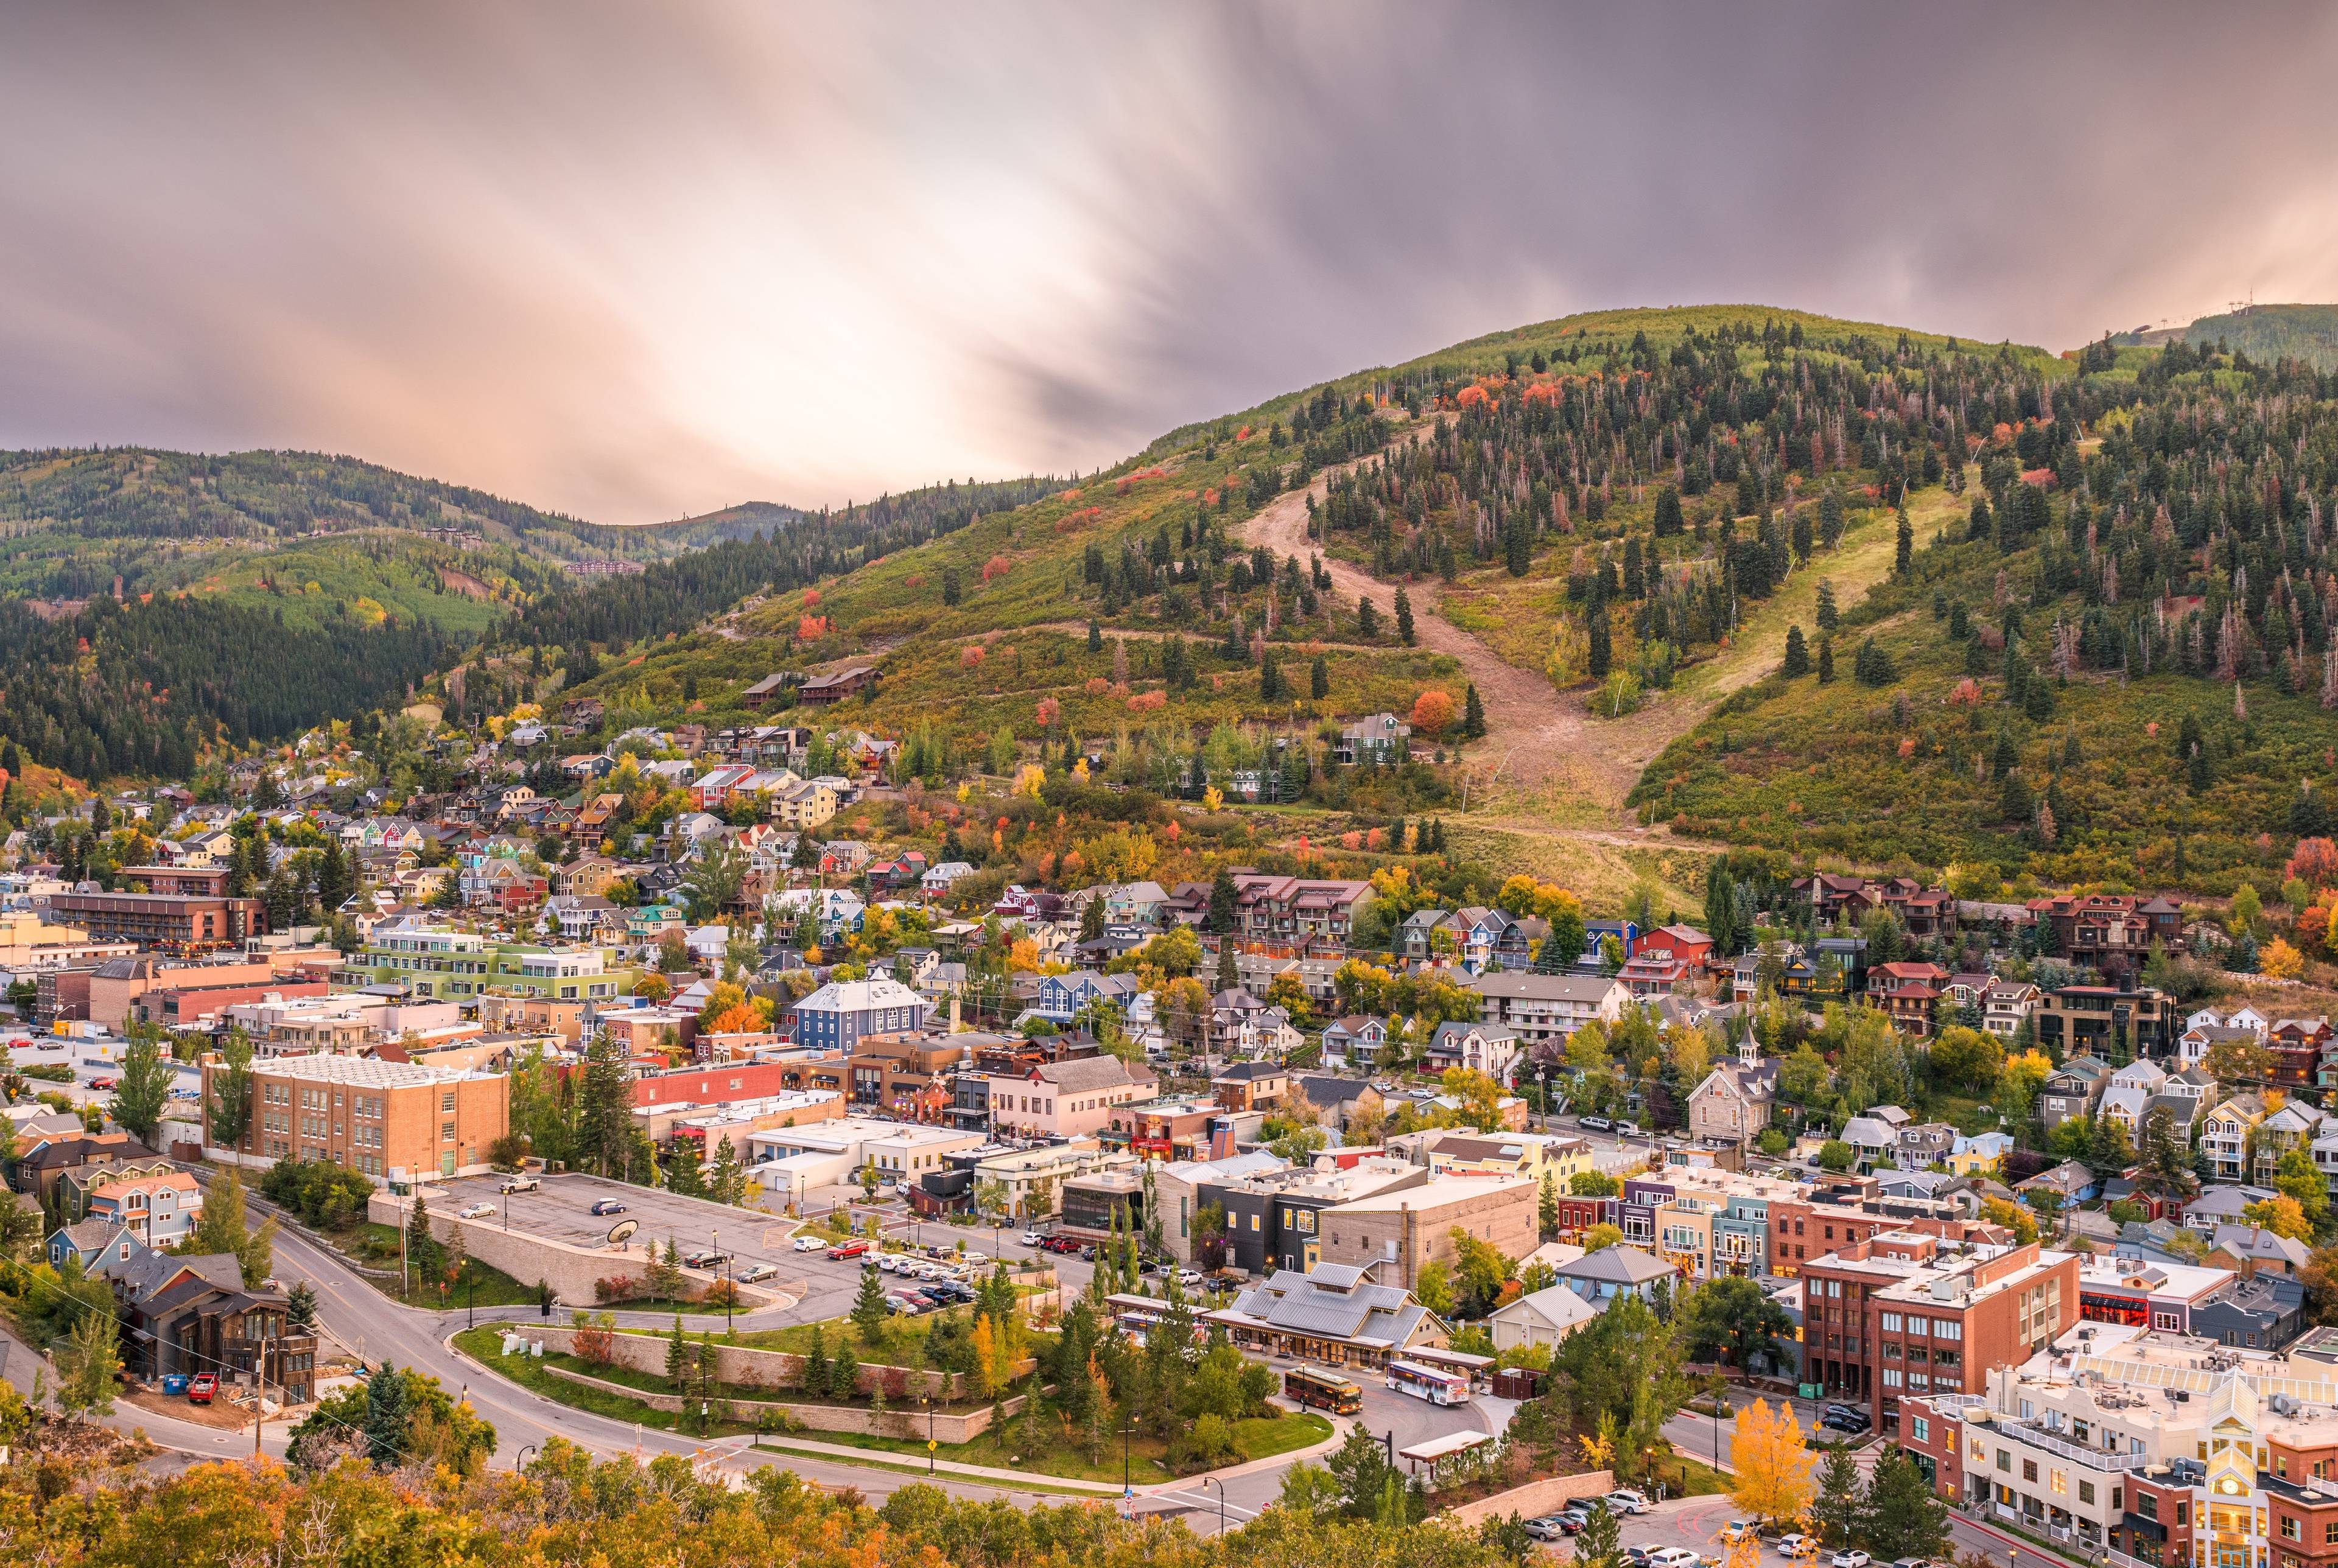 Weekend Trip to Mountain Resort Towns – Park City and Midway